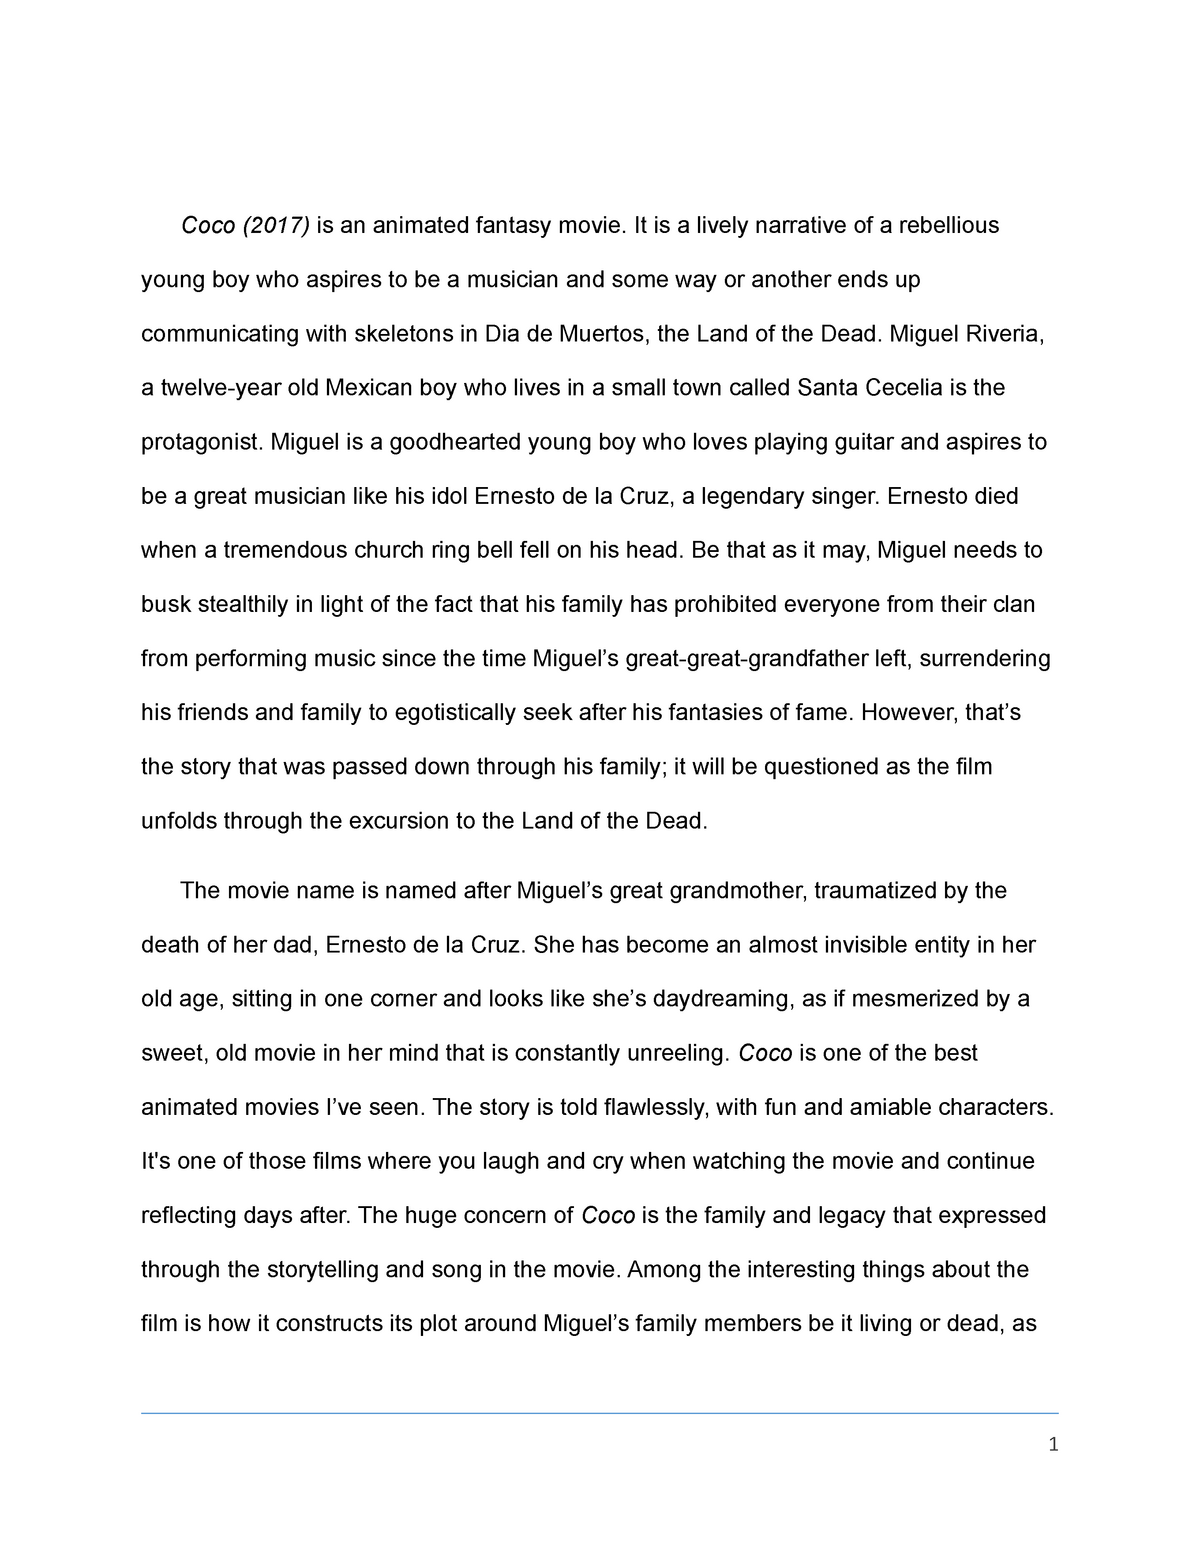 Movie review essay example